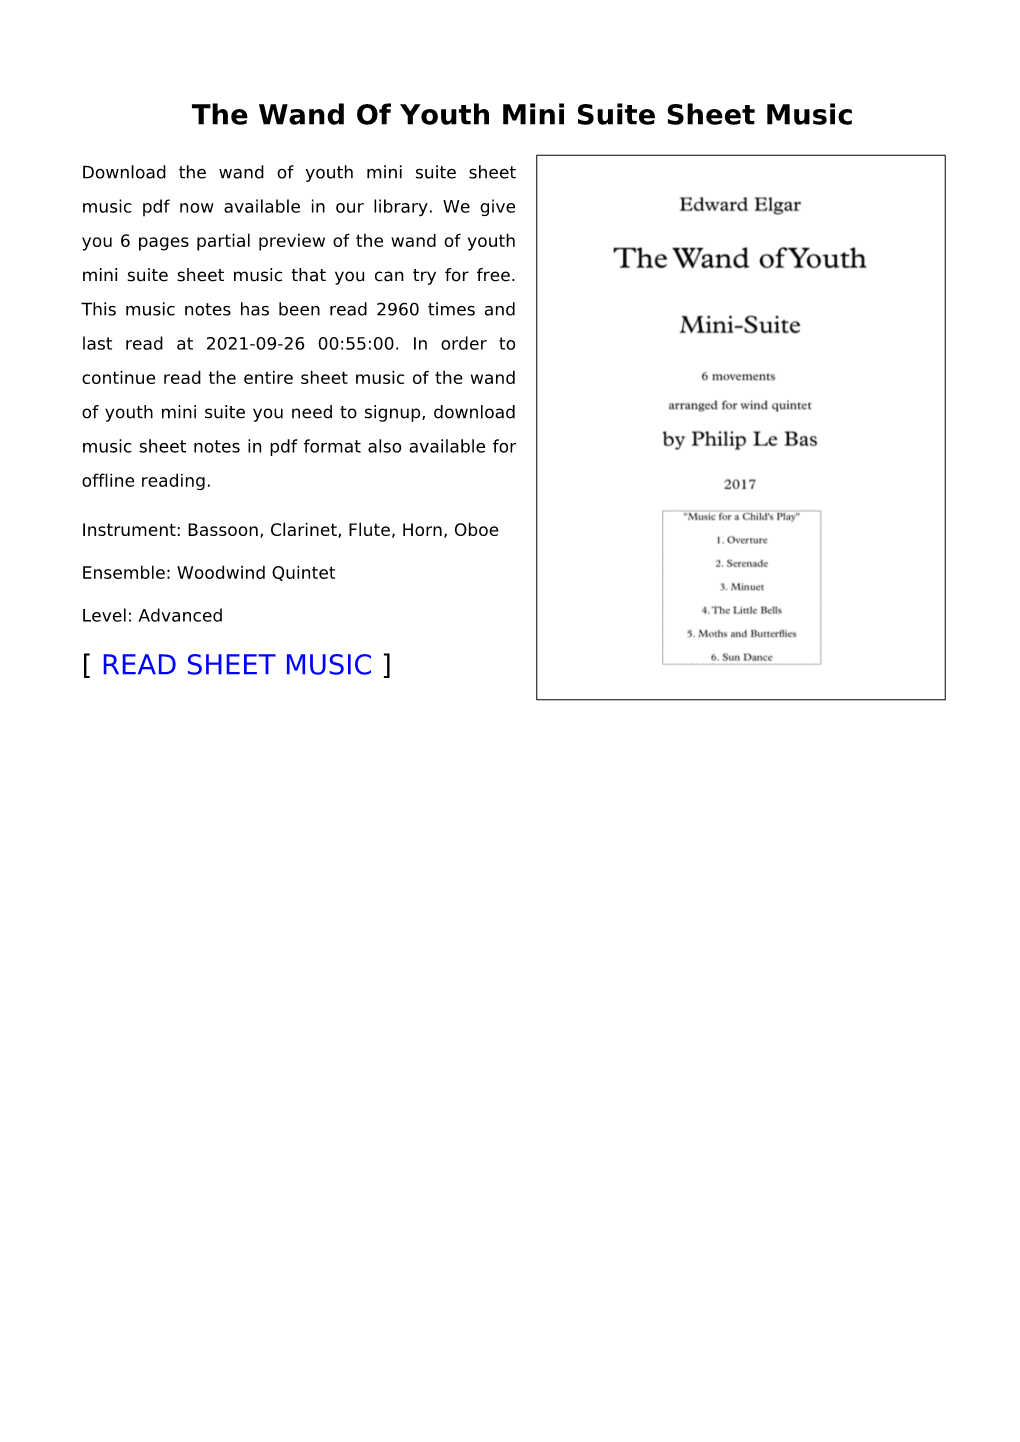 The Wand of Youth Mini Suite Sheet Music